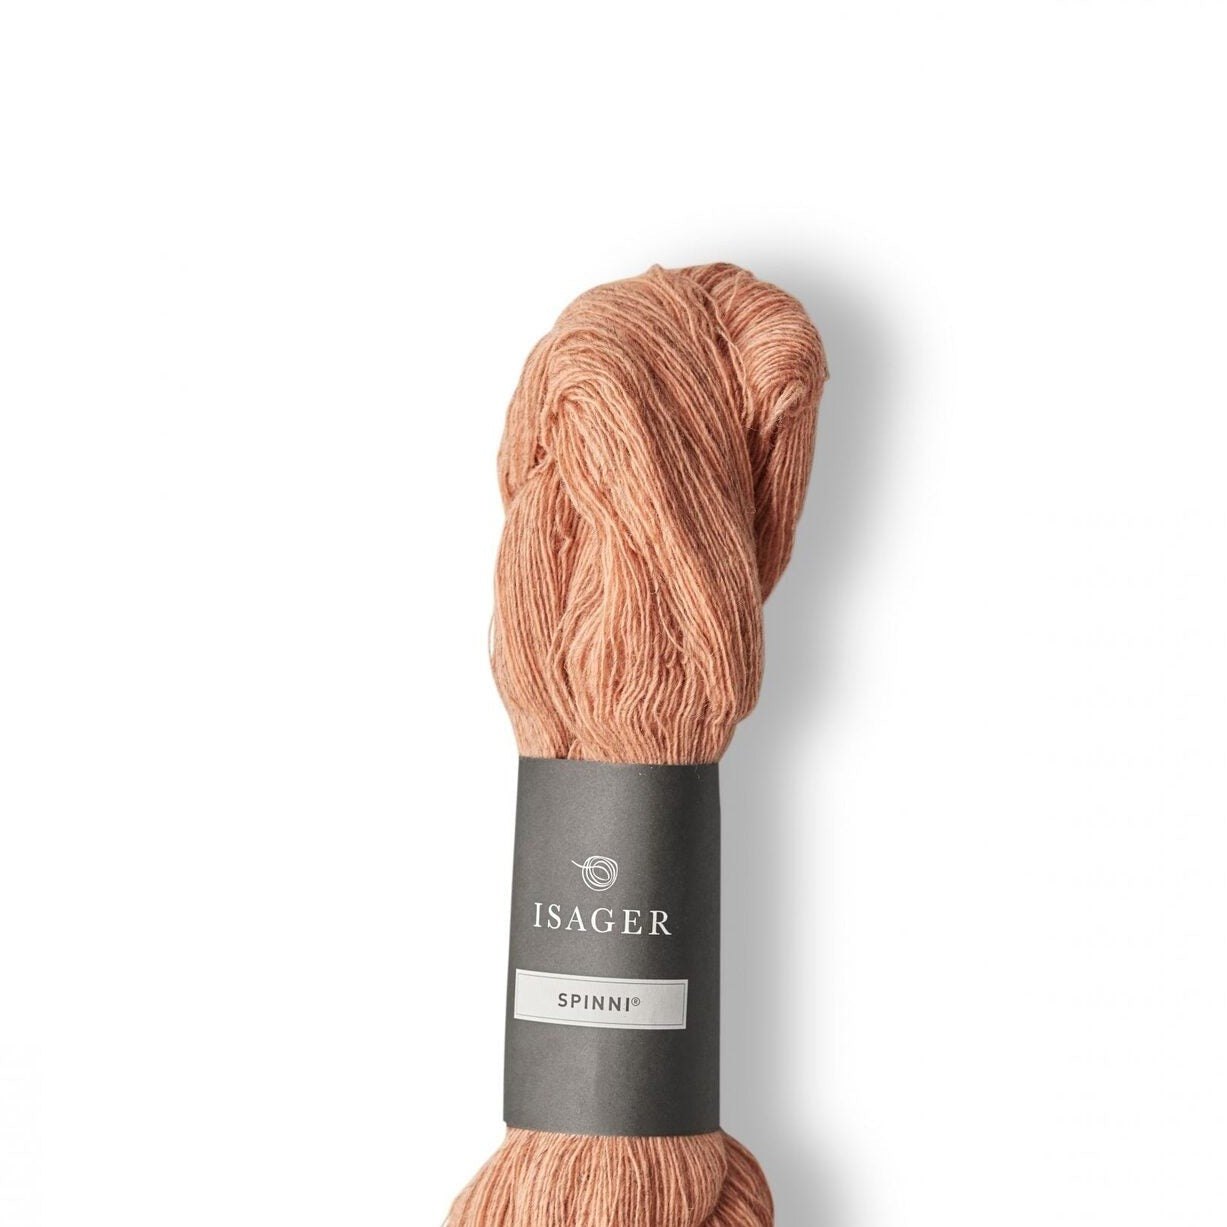 Isager Spinni - 39s - 2 Ply - Isager - The Little Yarn Store